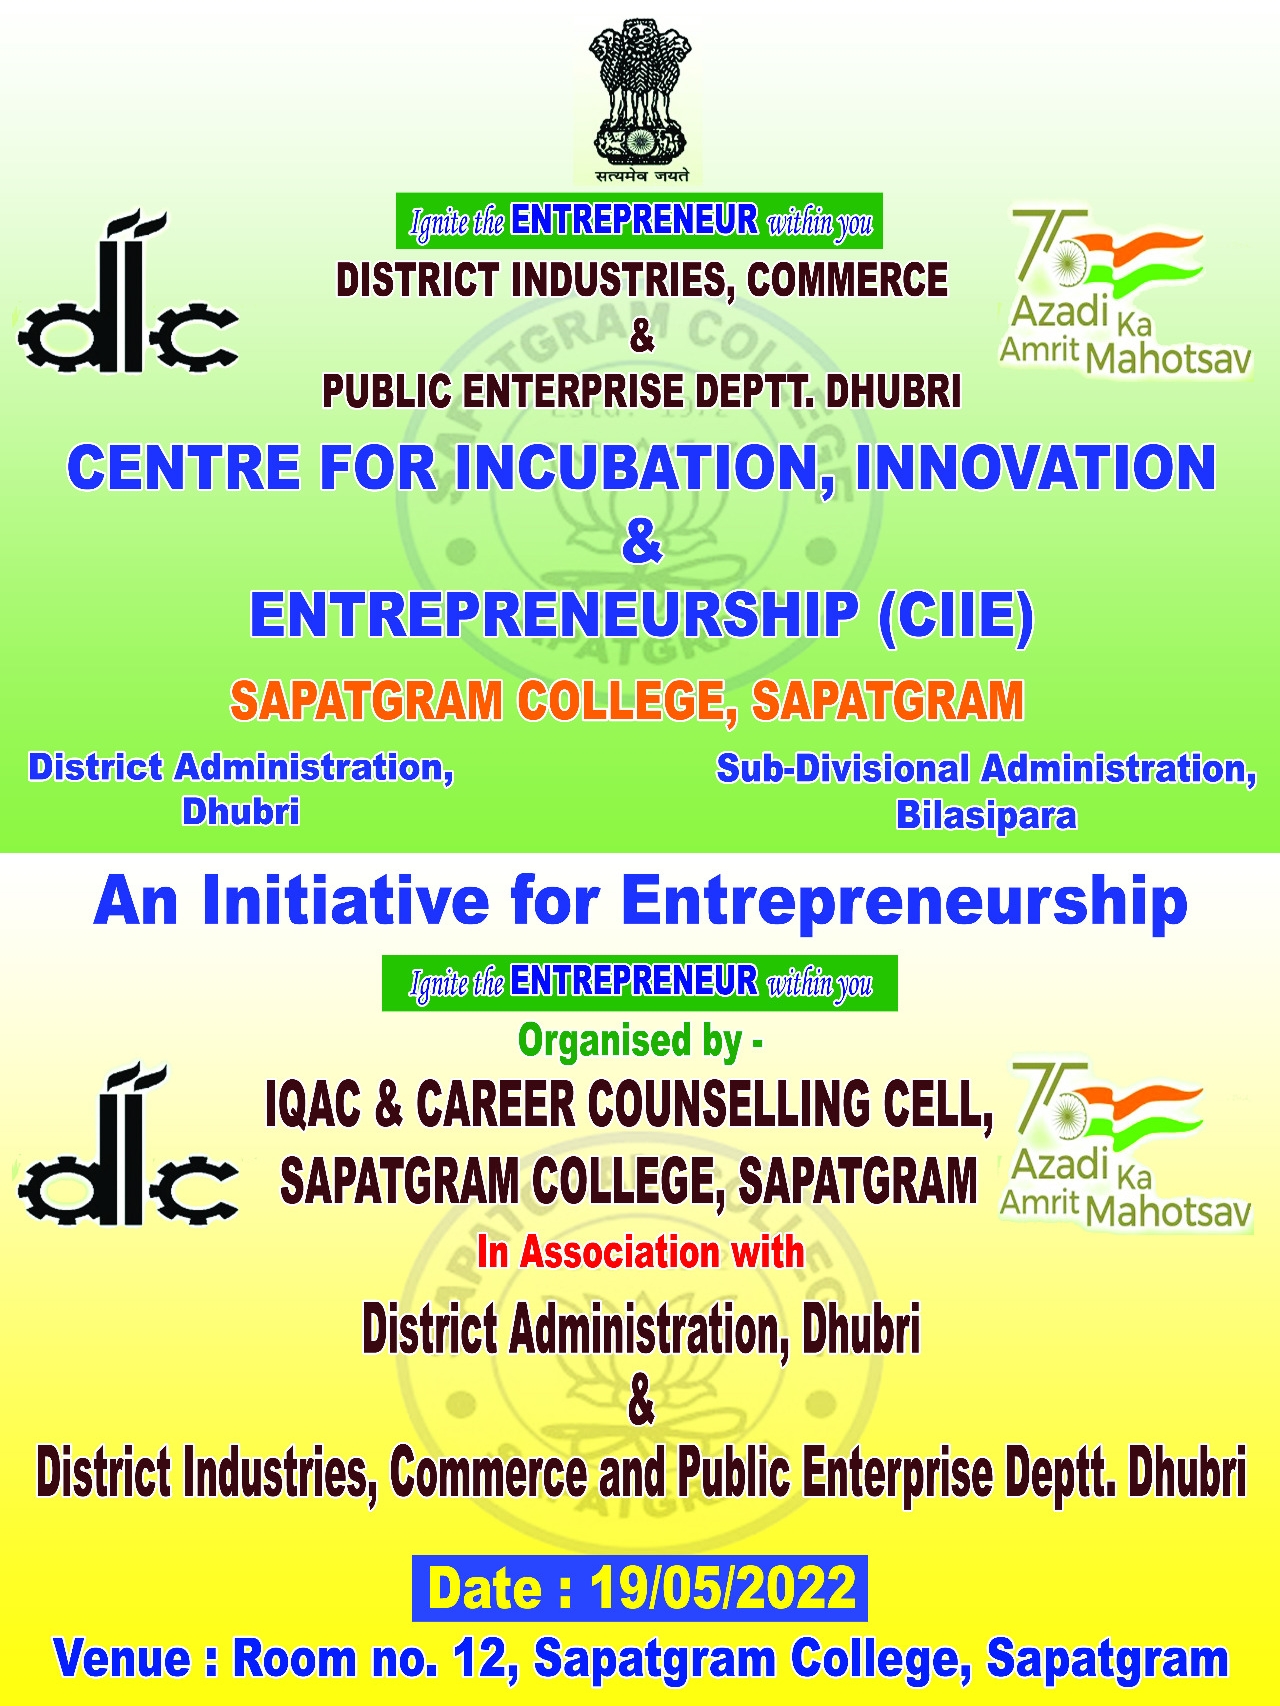 Inauguration of Centre for Inc